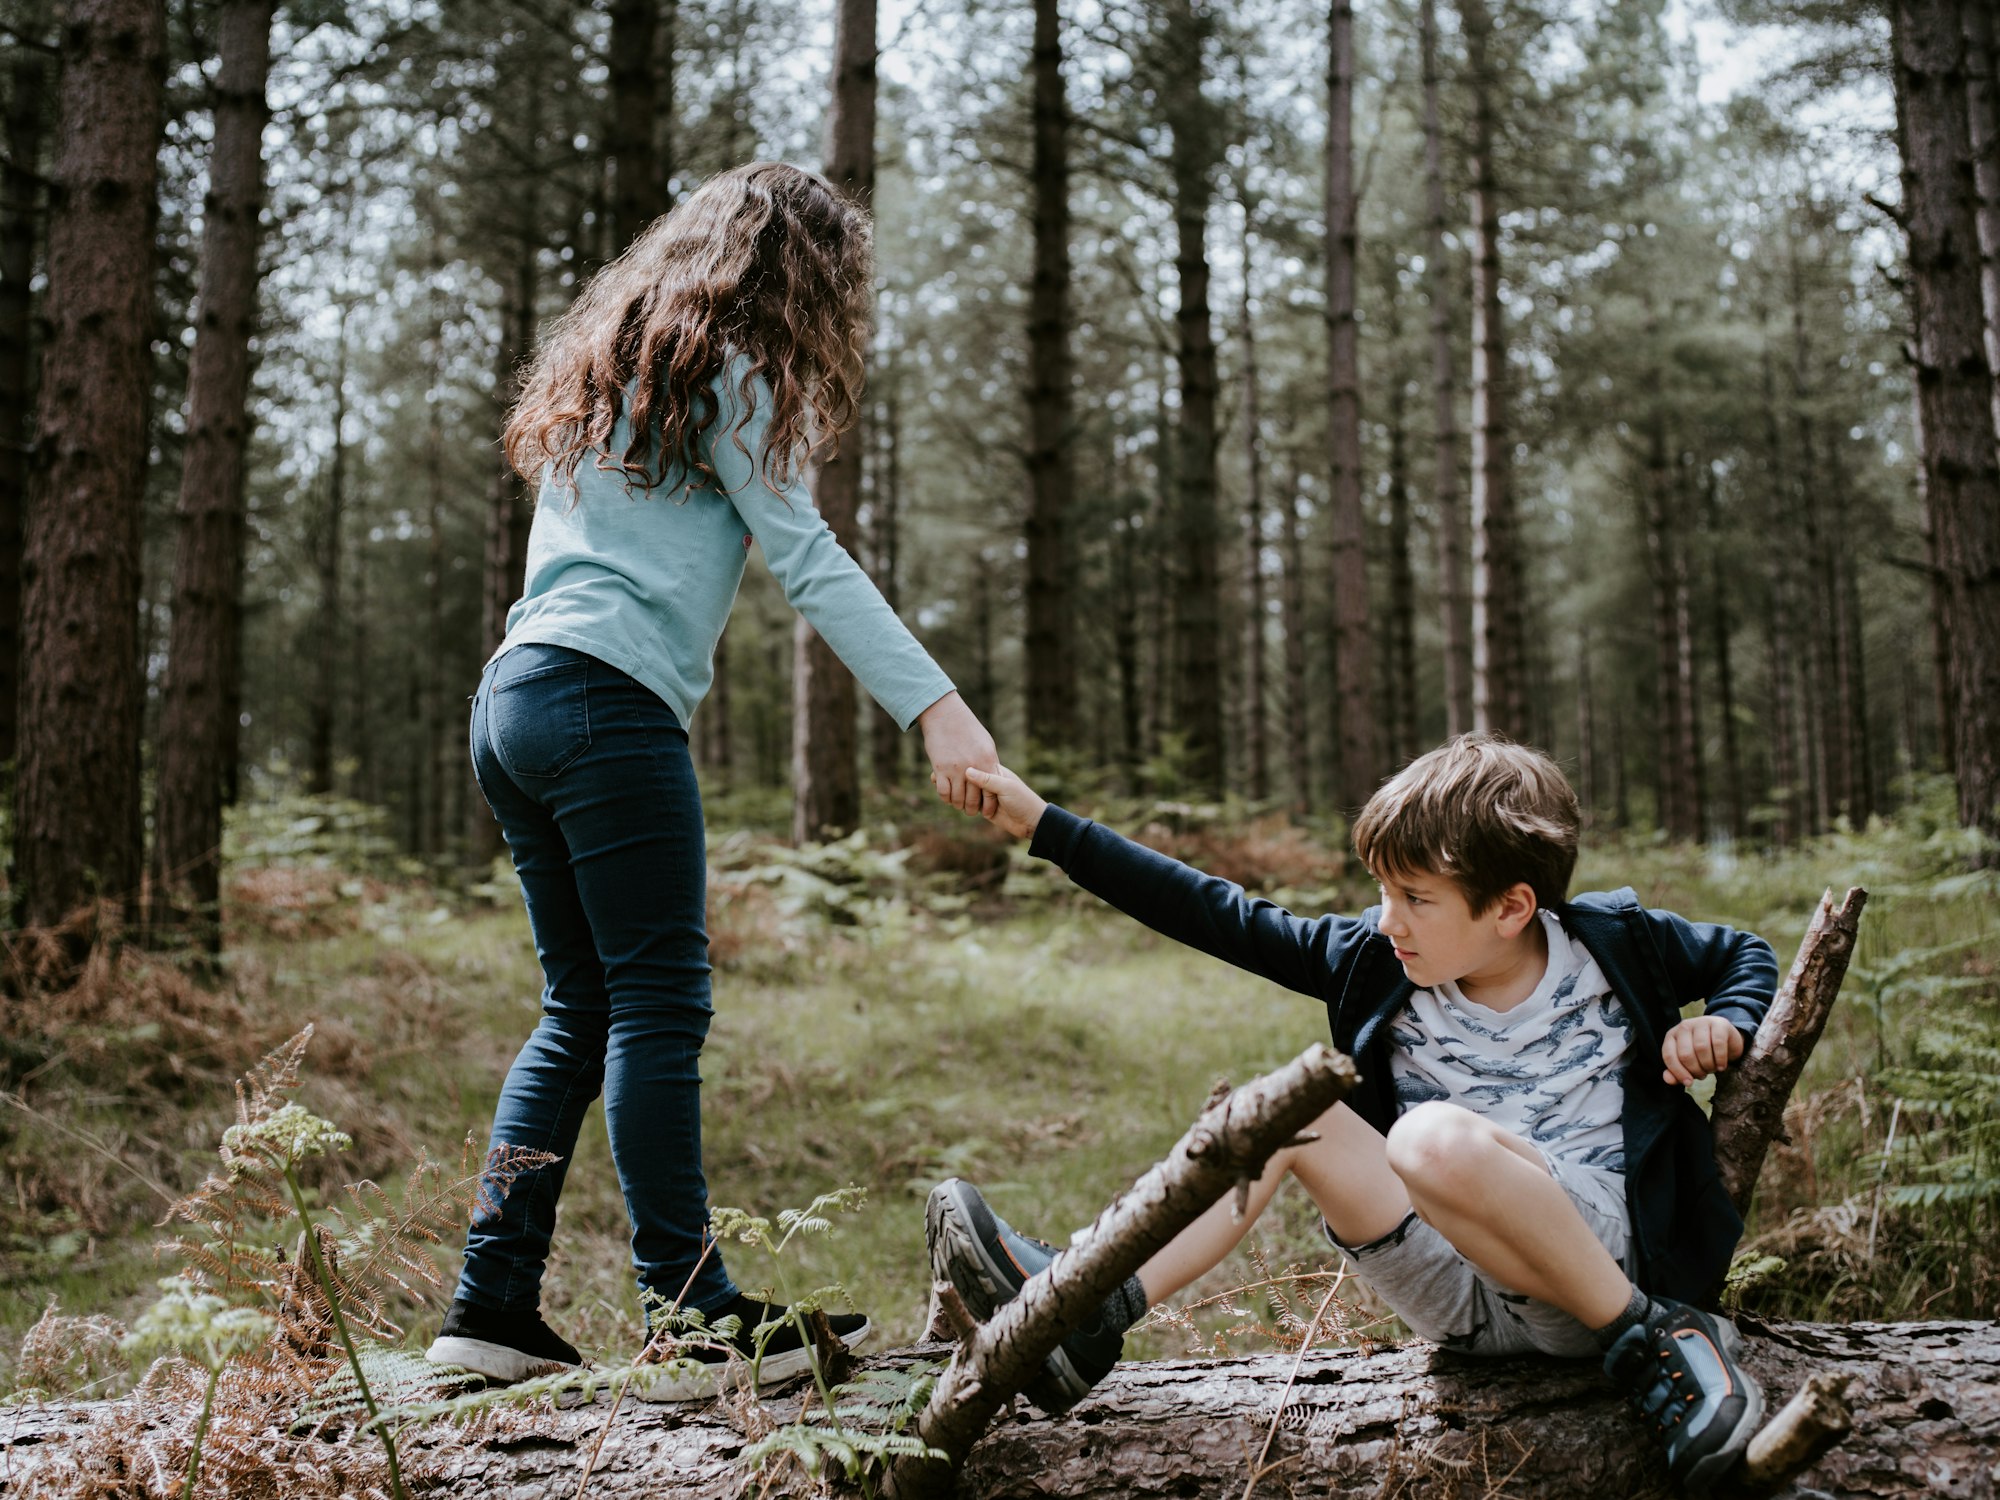 Girl lends hand to help a boy stand up on top of a log.